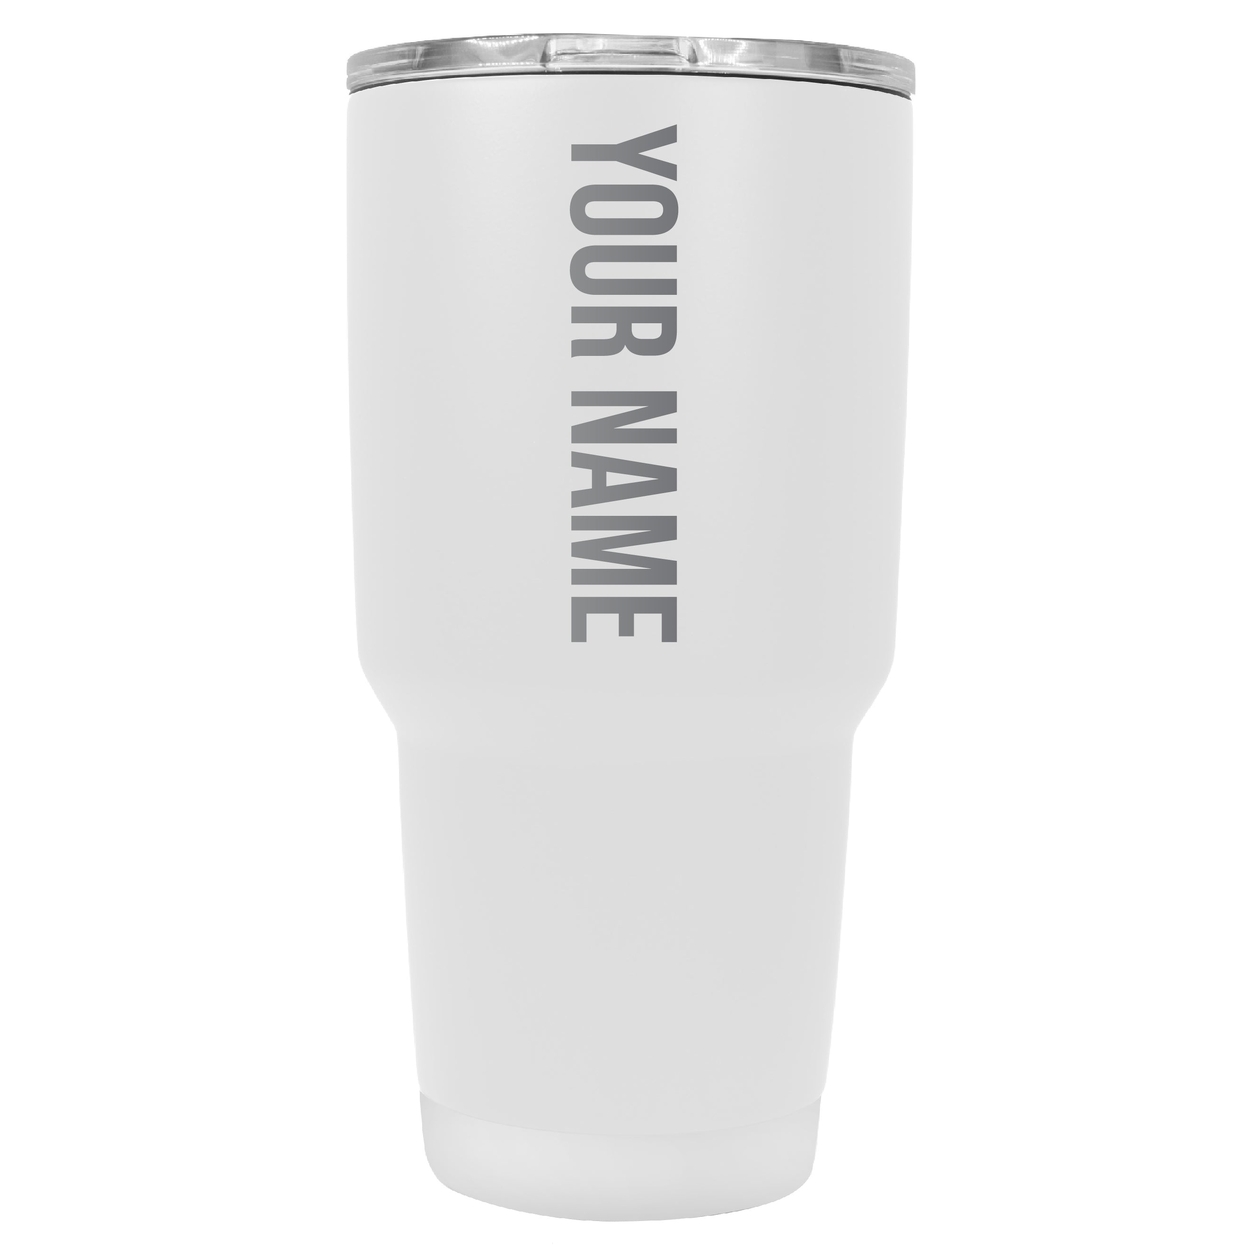 Customizable Laser Etched 24 Oz Insulated Stainless Steel Tumbler Personalized With Custom Name Or Message - White, 2 Pack